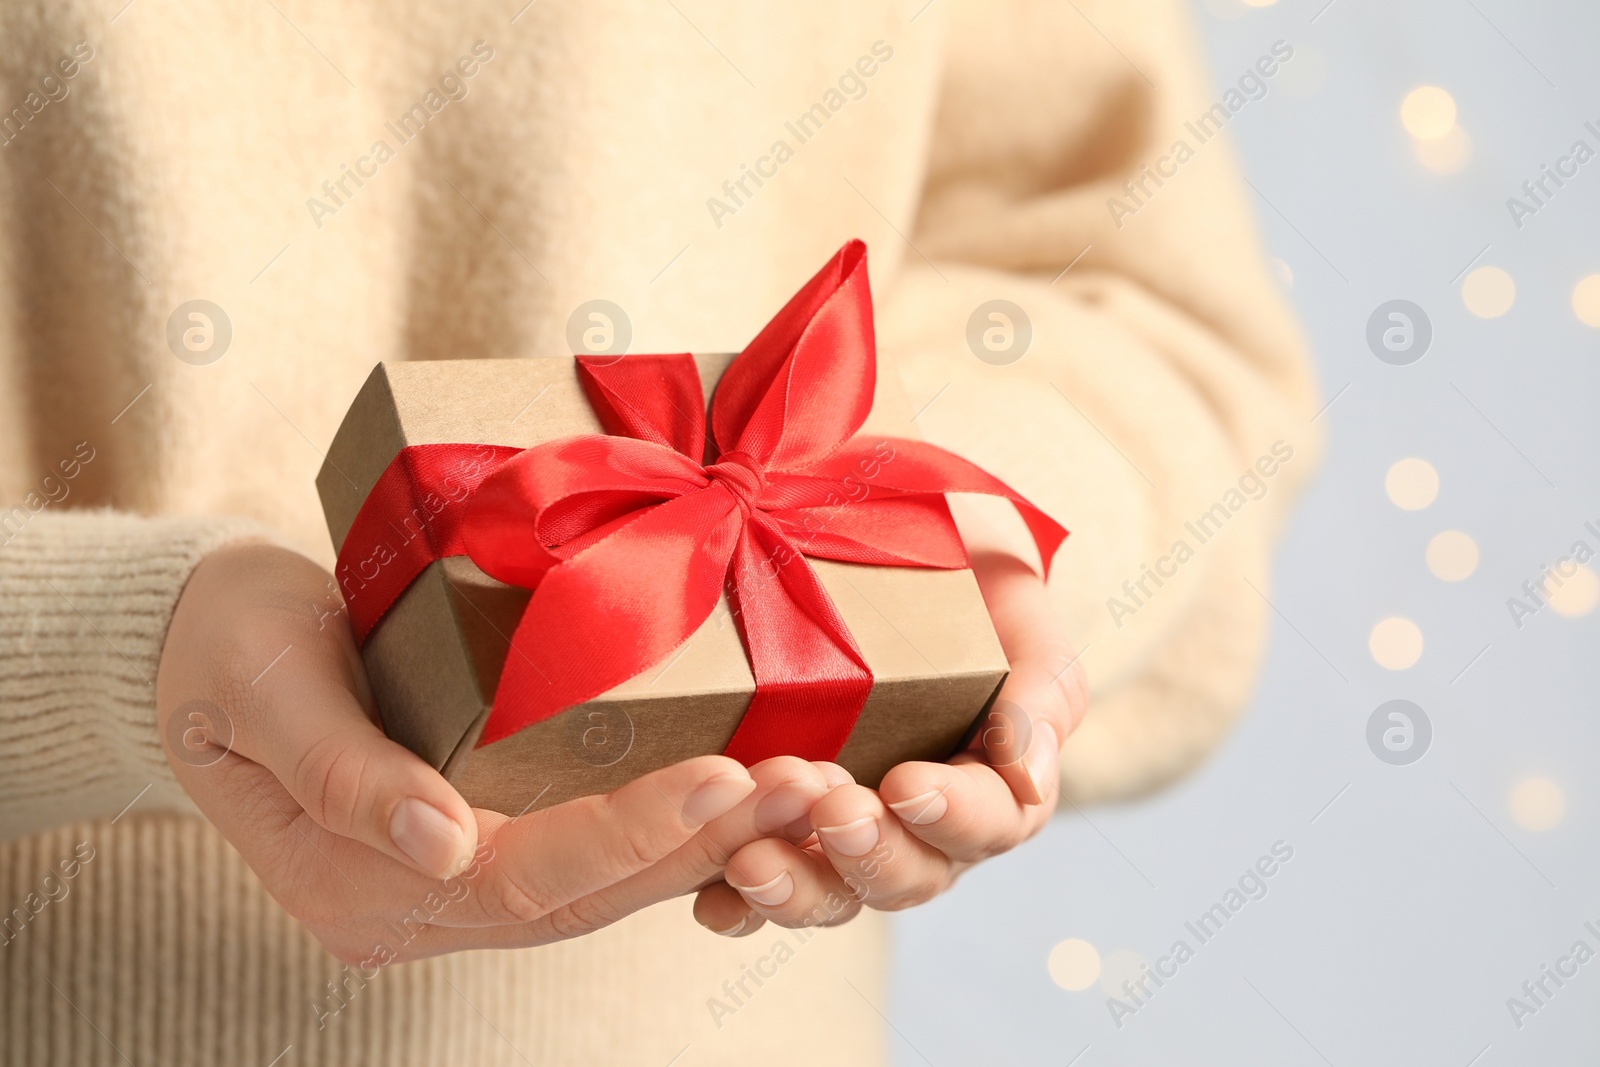 Photo of Woman holding gift box with red bow against blurred festive lights, closeup and space for text. Bokeh effect